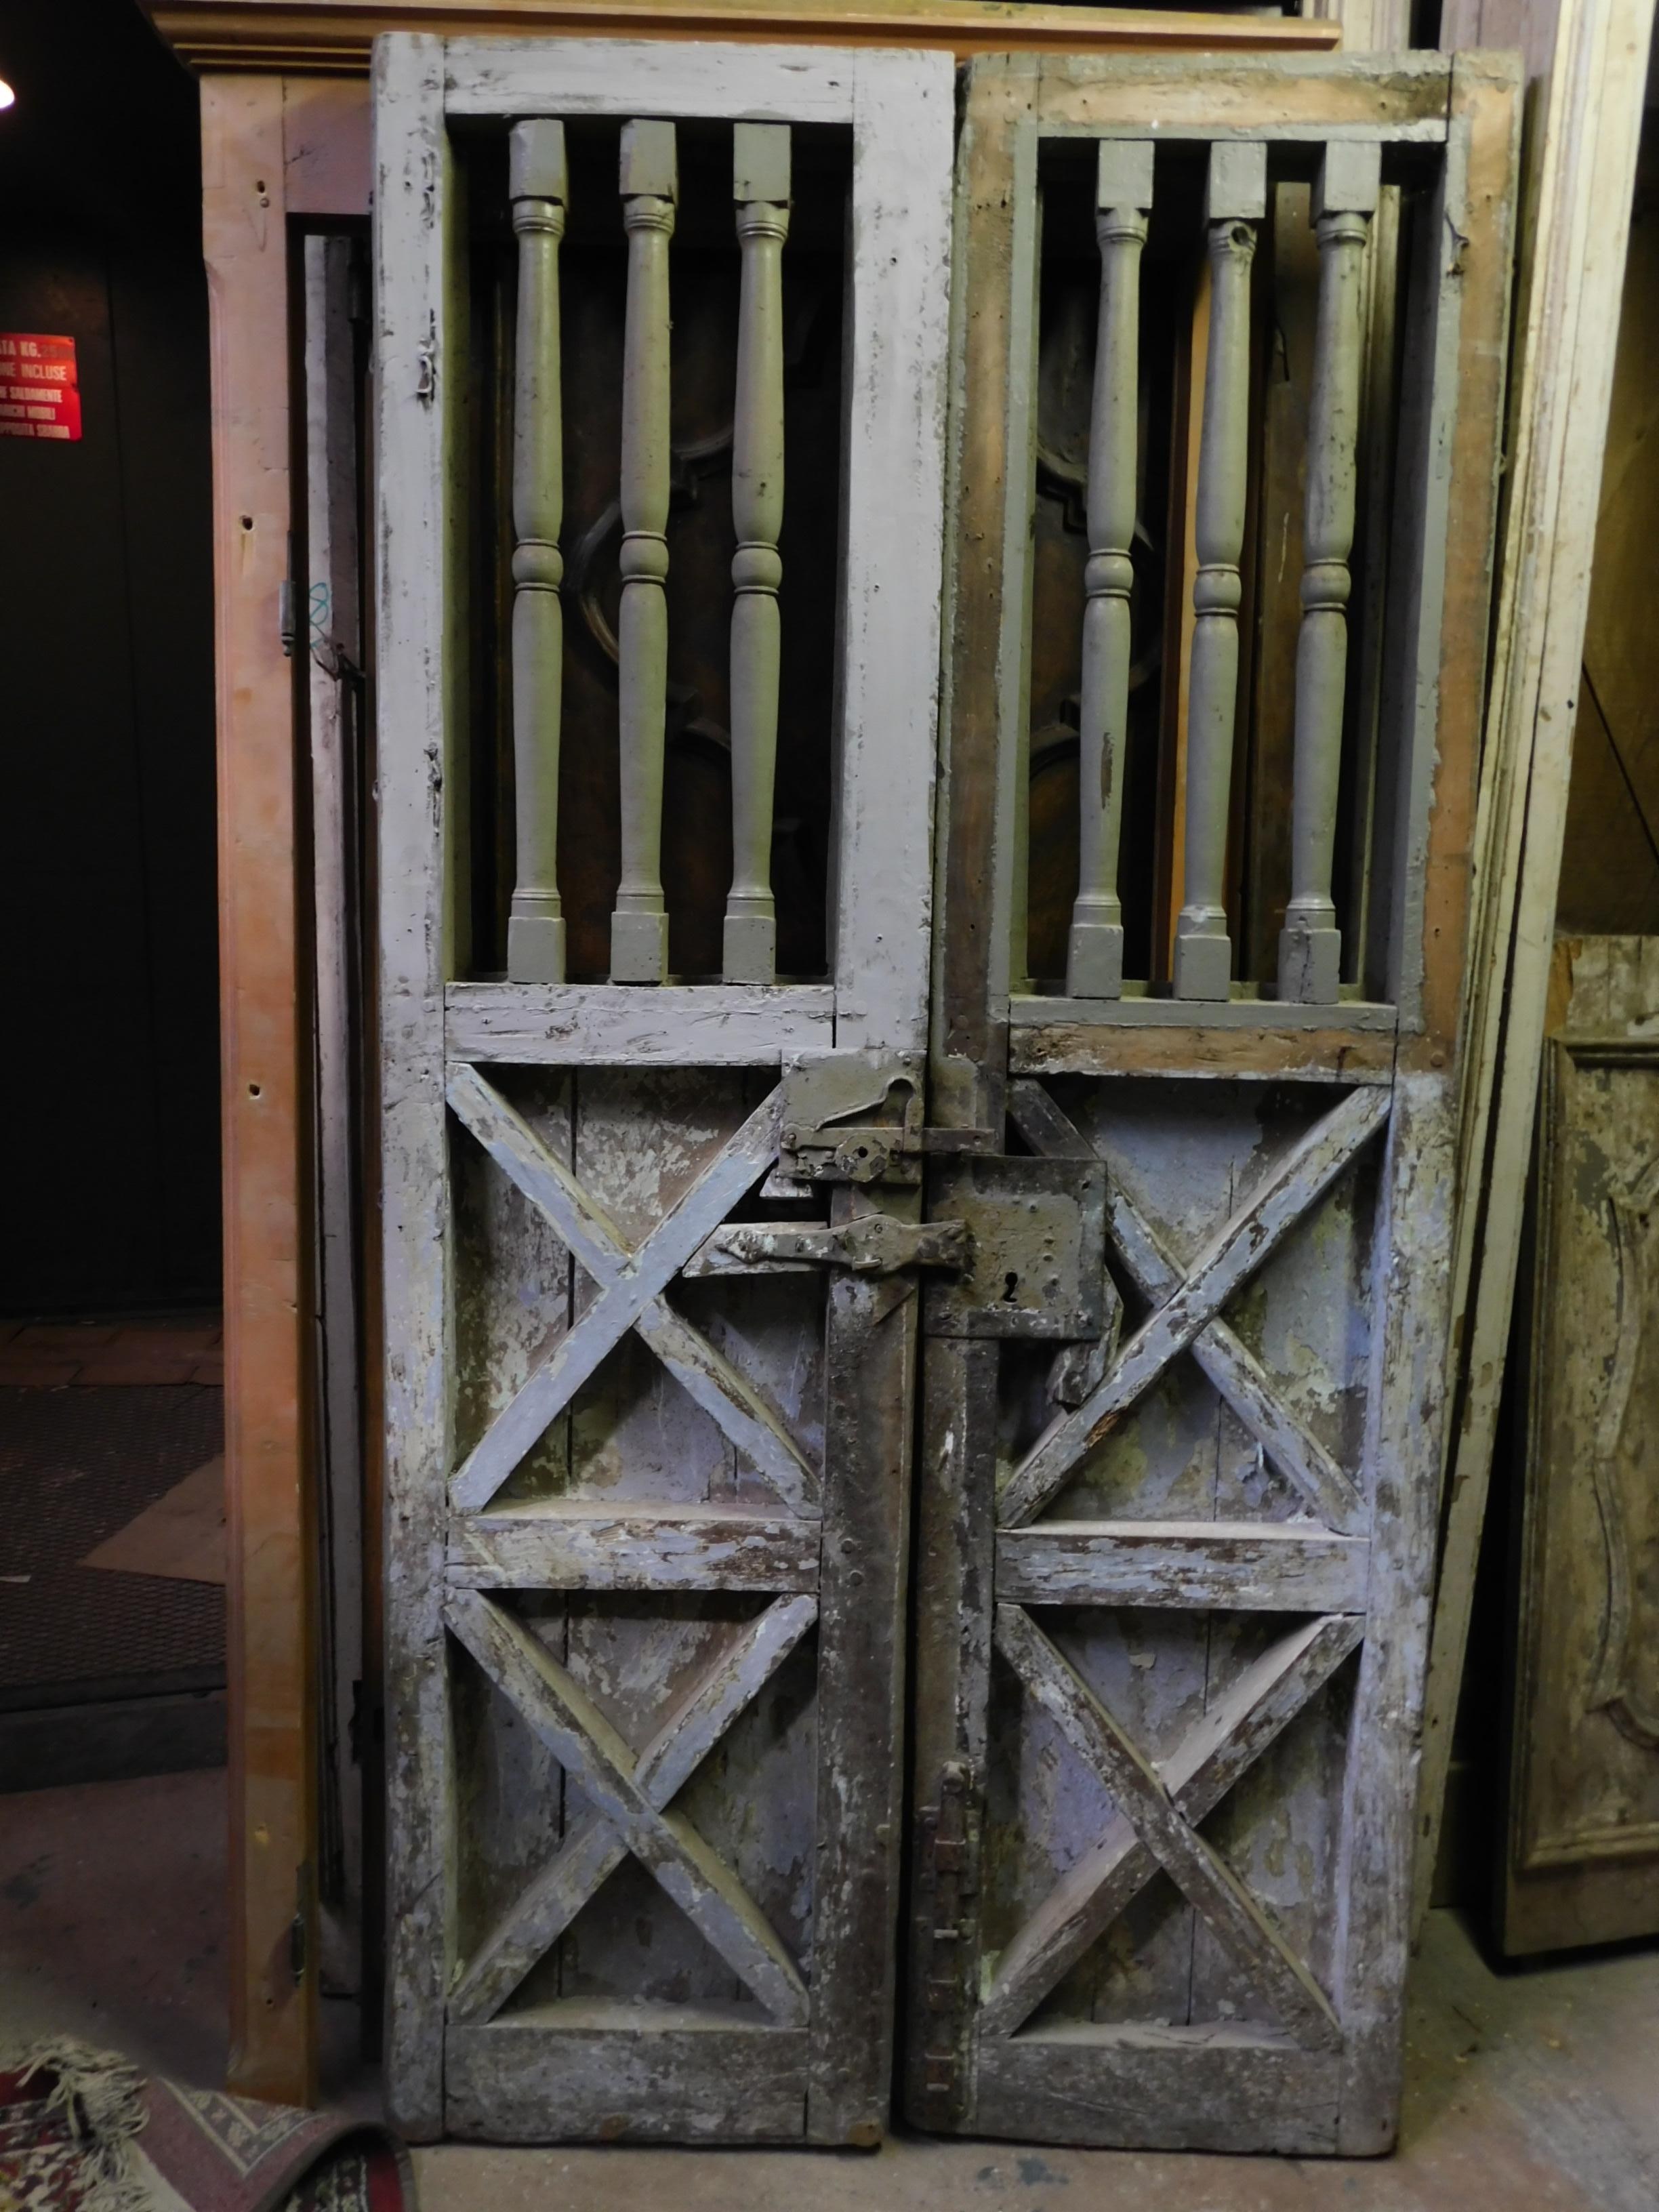 Ancient entrance door or gate with turned columns, hand painted in gray green, beautiful patina and original iron vents, was in a patio covered in a 16th century building, originating from Naples in Italy.
Of great antiquarian value, it also lends